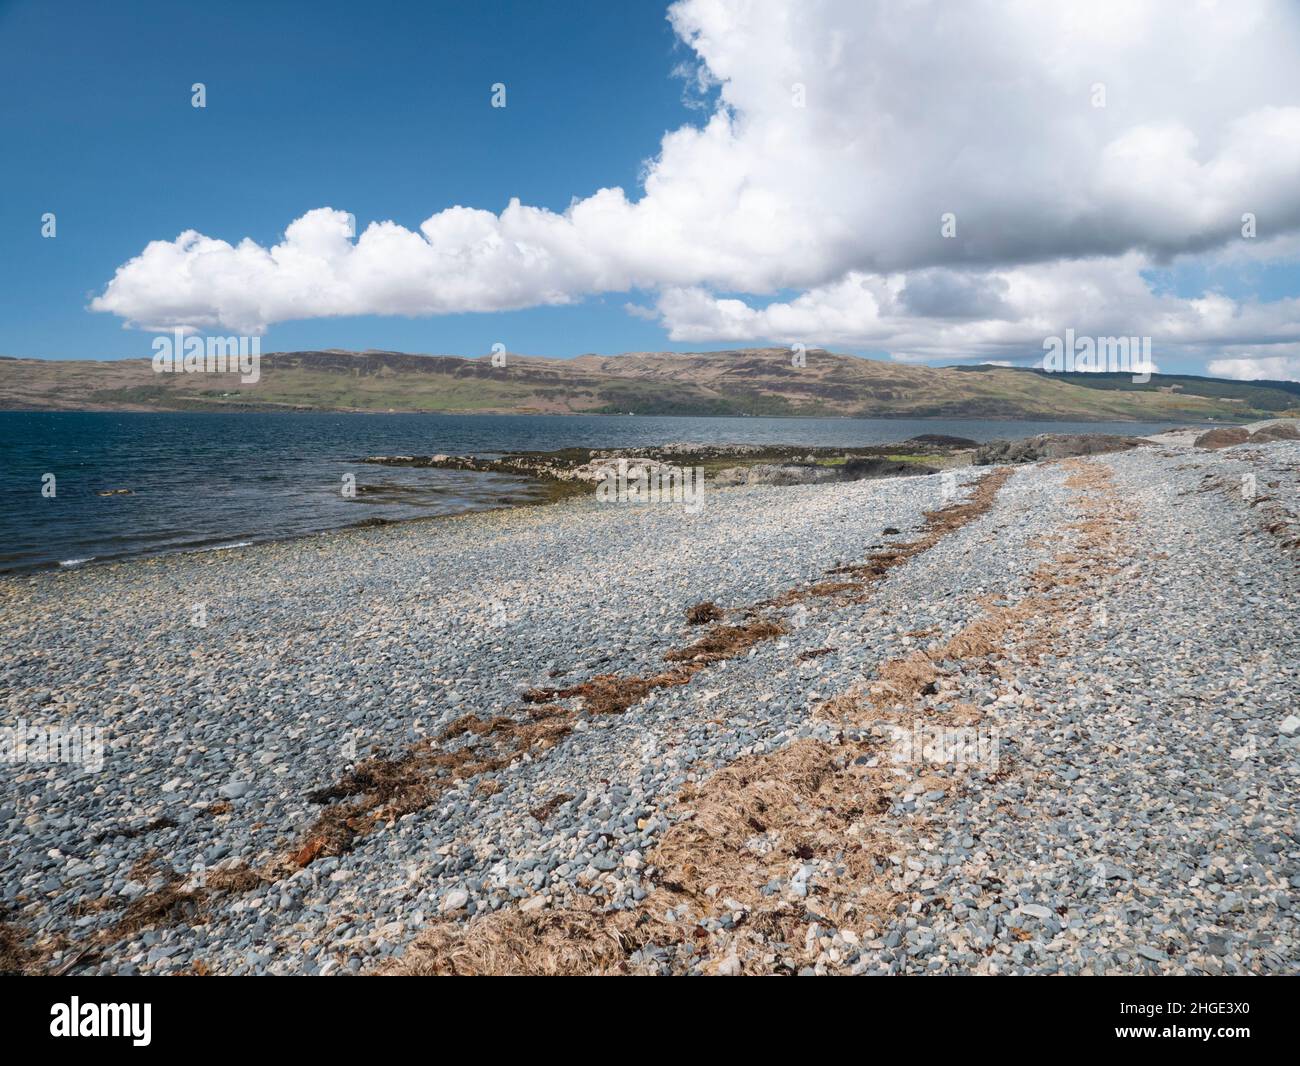 View of Loch Na Keal, Mull, Scotland Stock Photo